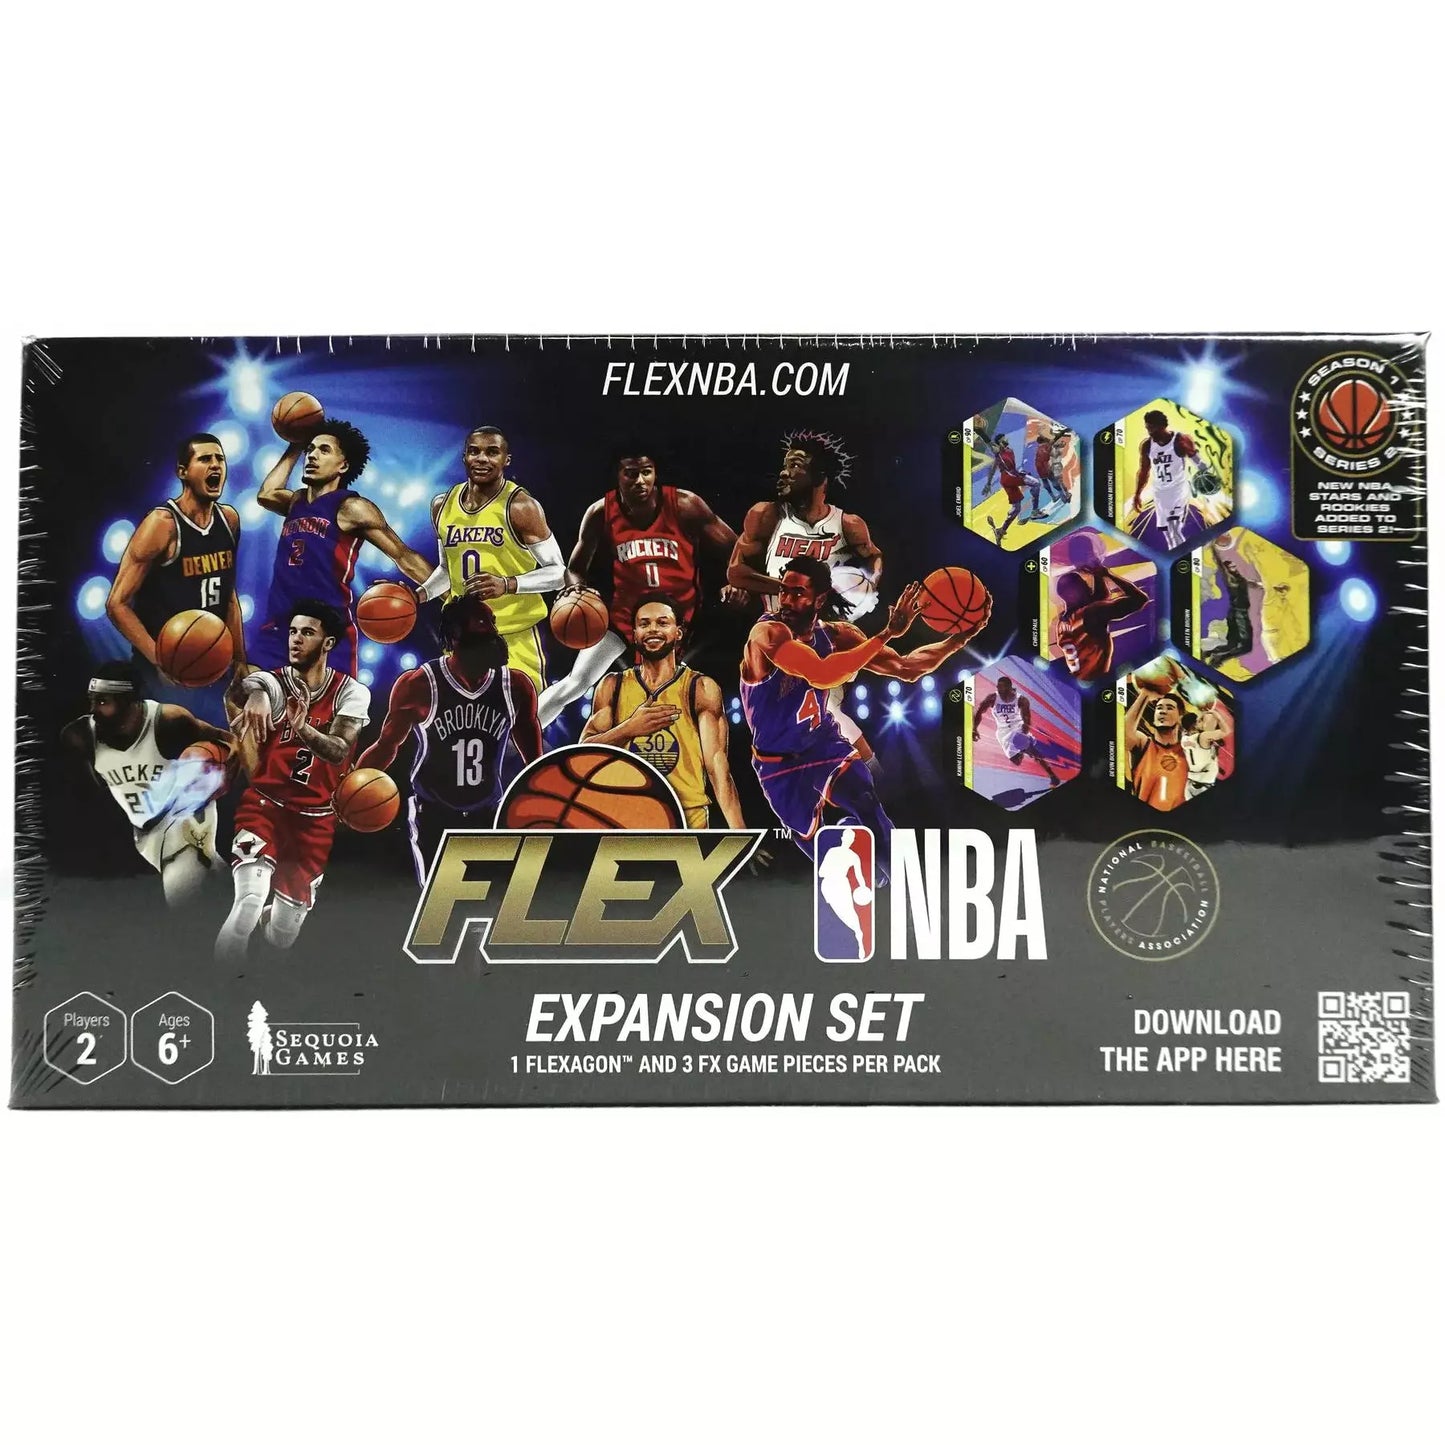  Sequoia Games Flex NBA Basketball Expansion Set  Local Legends Cards & Collectibles